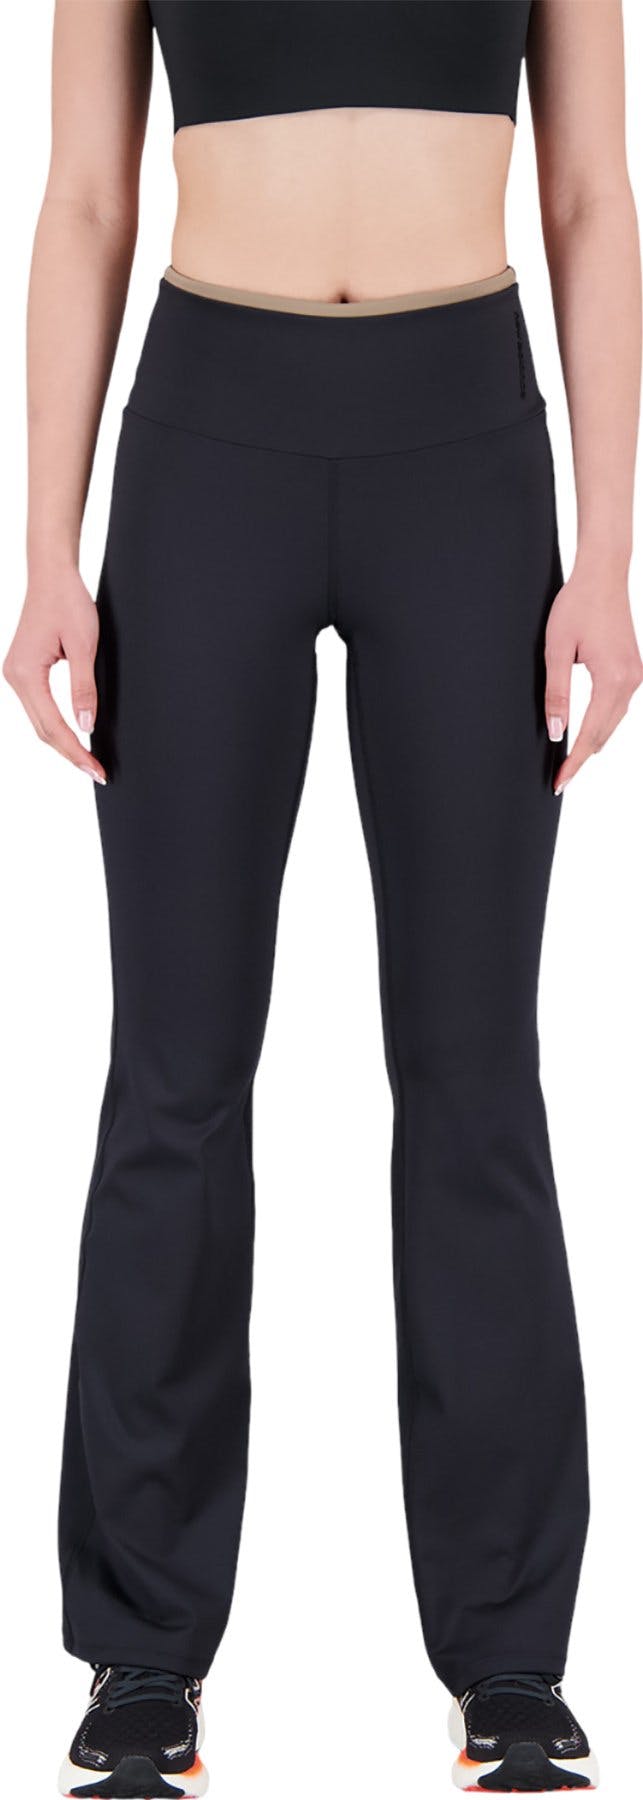 Product image for Achiever Shape Shield Flare Pant - Women's